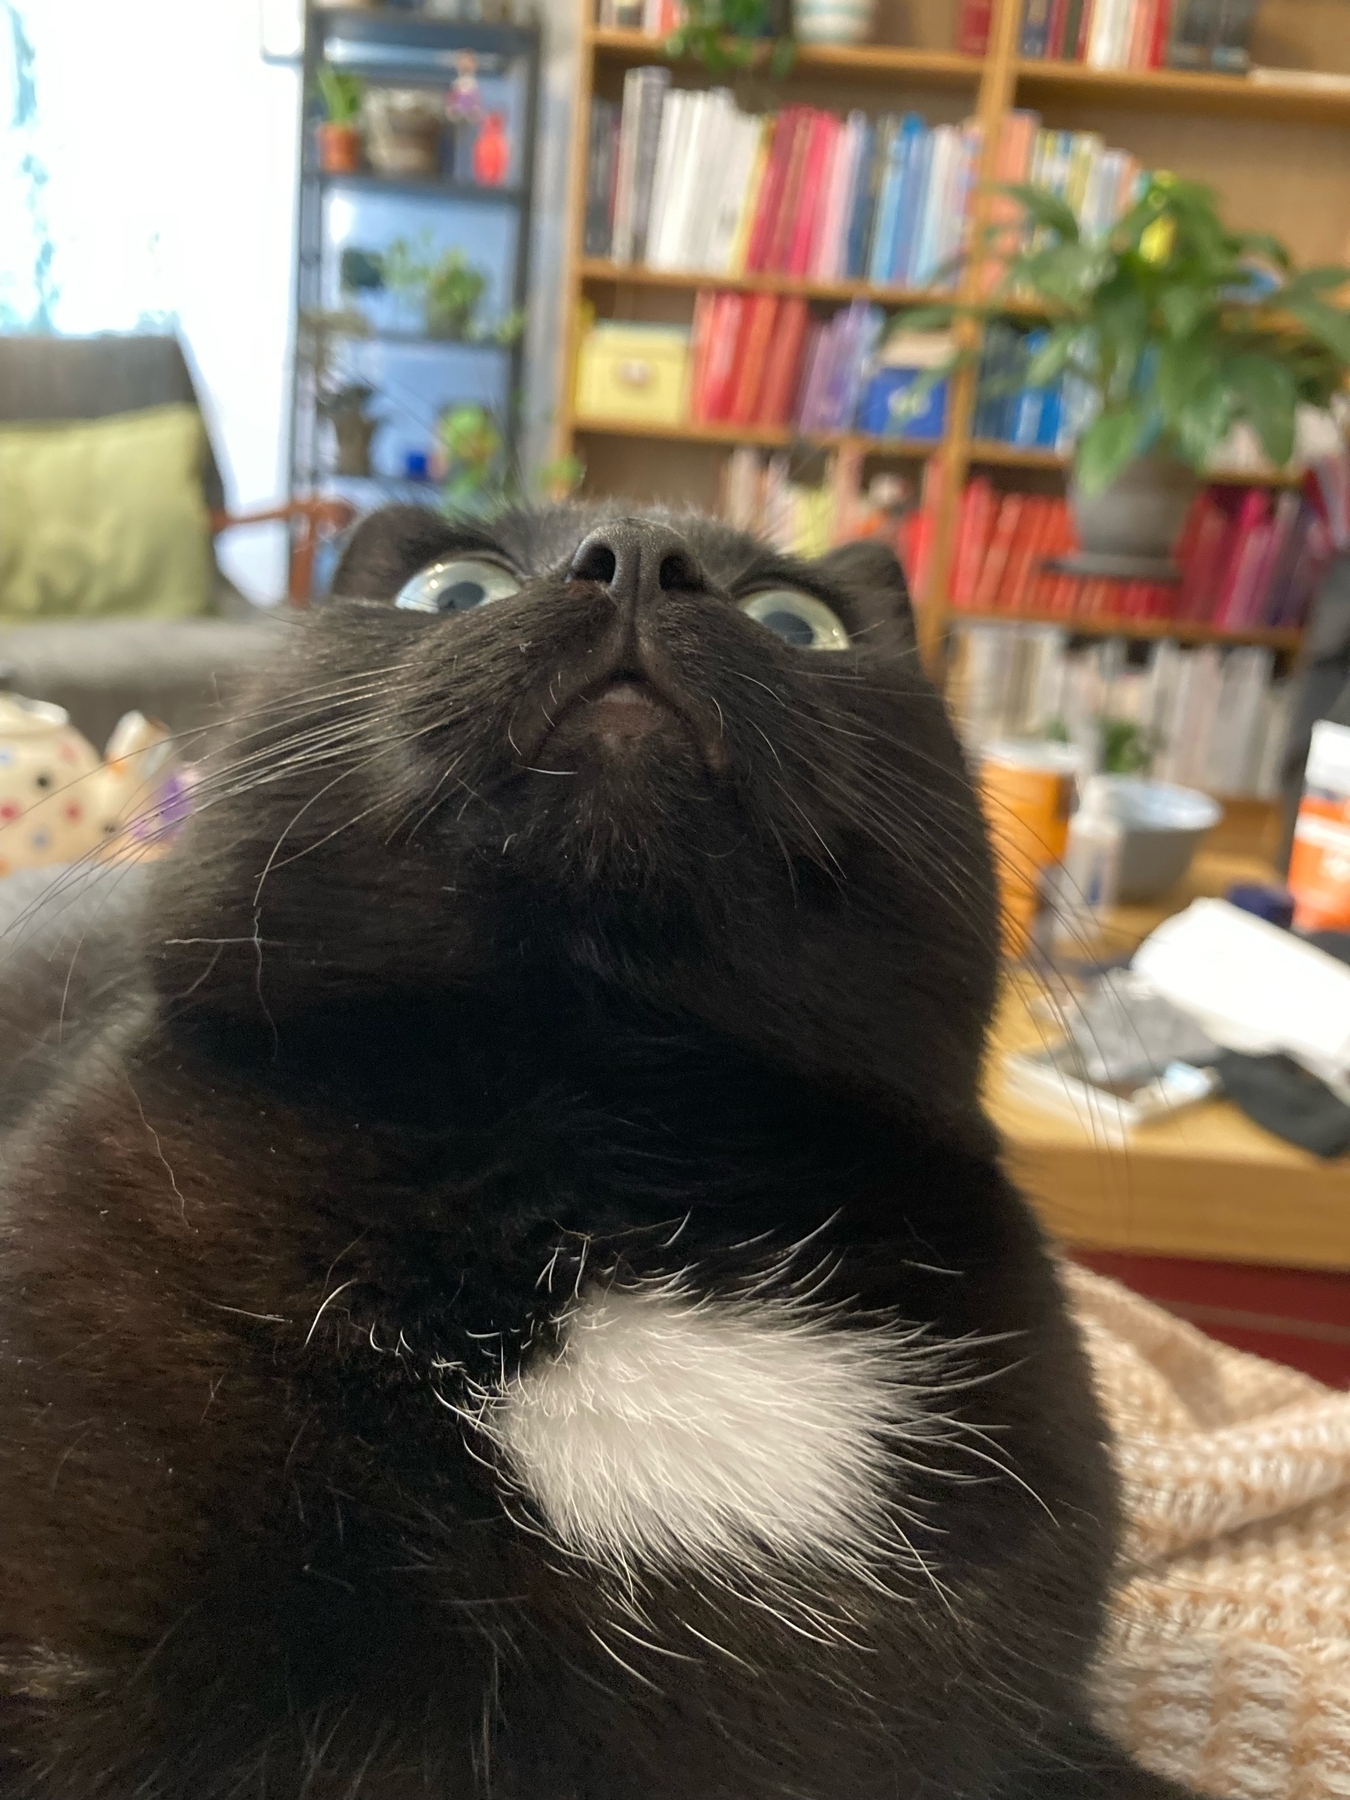 Kolka, a black cat with a white spot, is making a face and staring up at the ceiling.